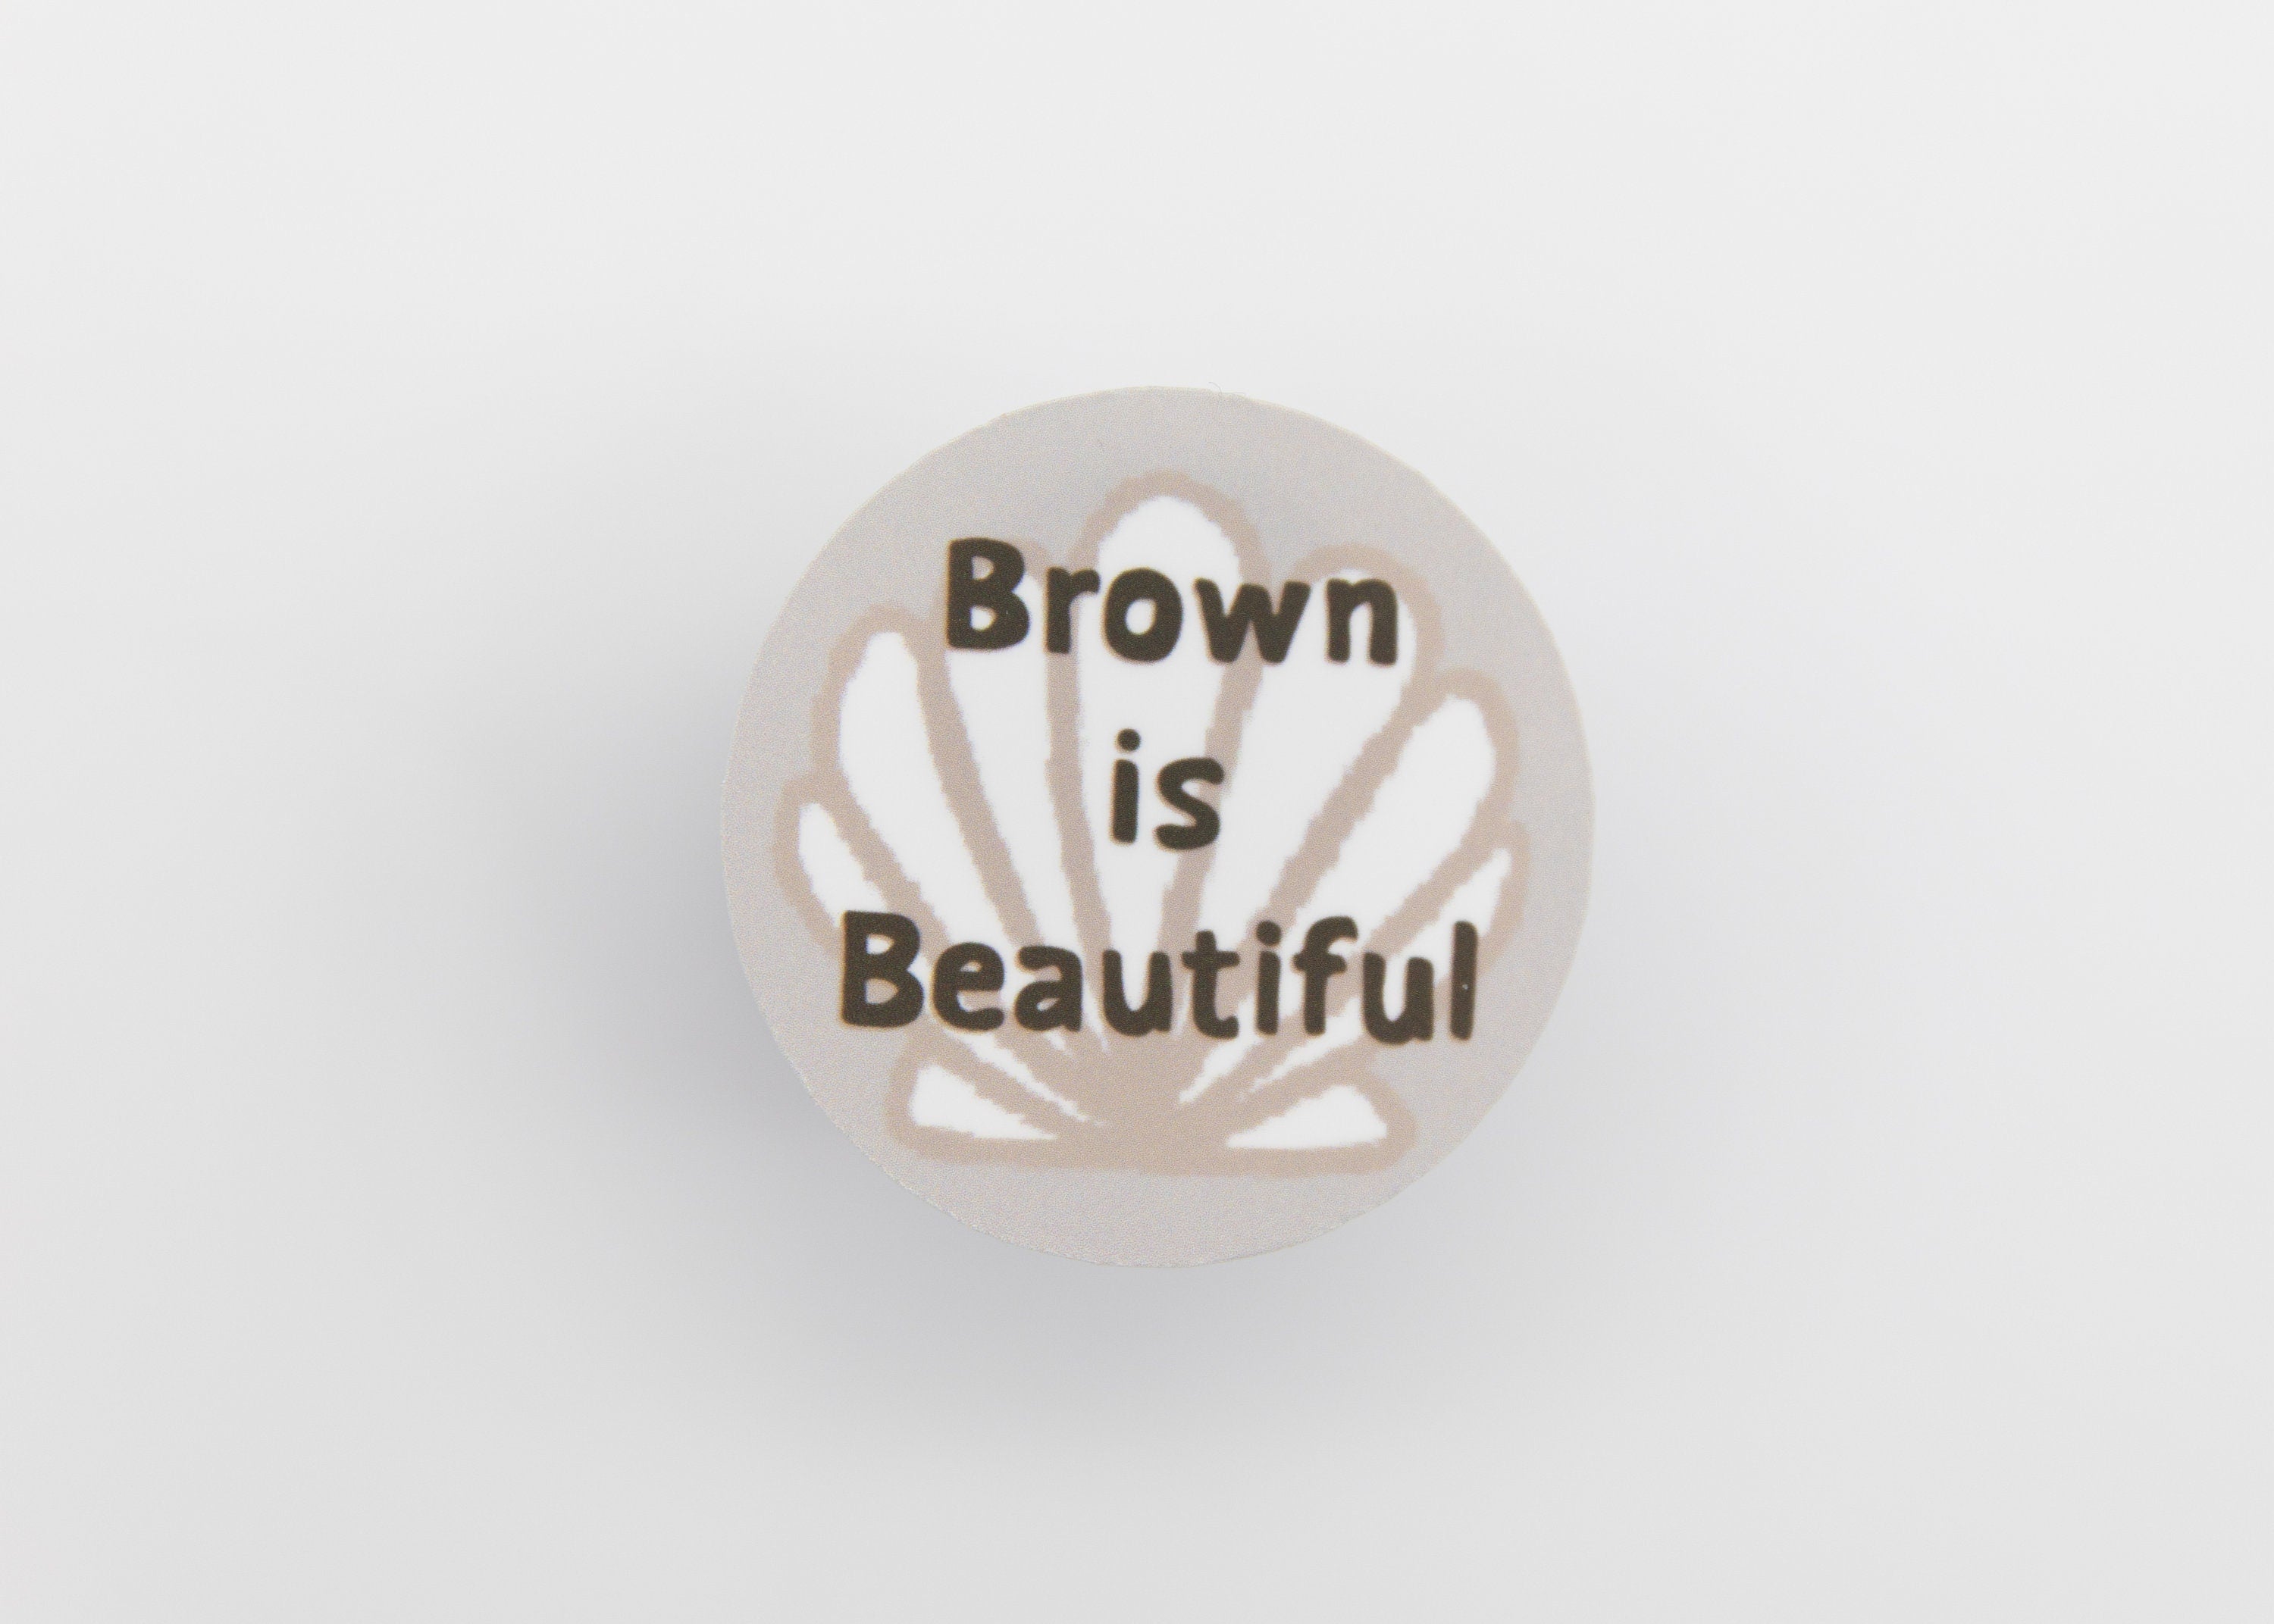 Mie Makes Brown is Beautiful Sticker, Filipina Stickers, Shell Sticker, Inspirational Quote, Filipino Sticker, Philippines, Waterbottle Sticker, Pinay